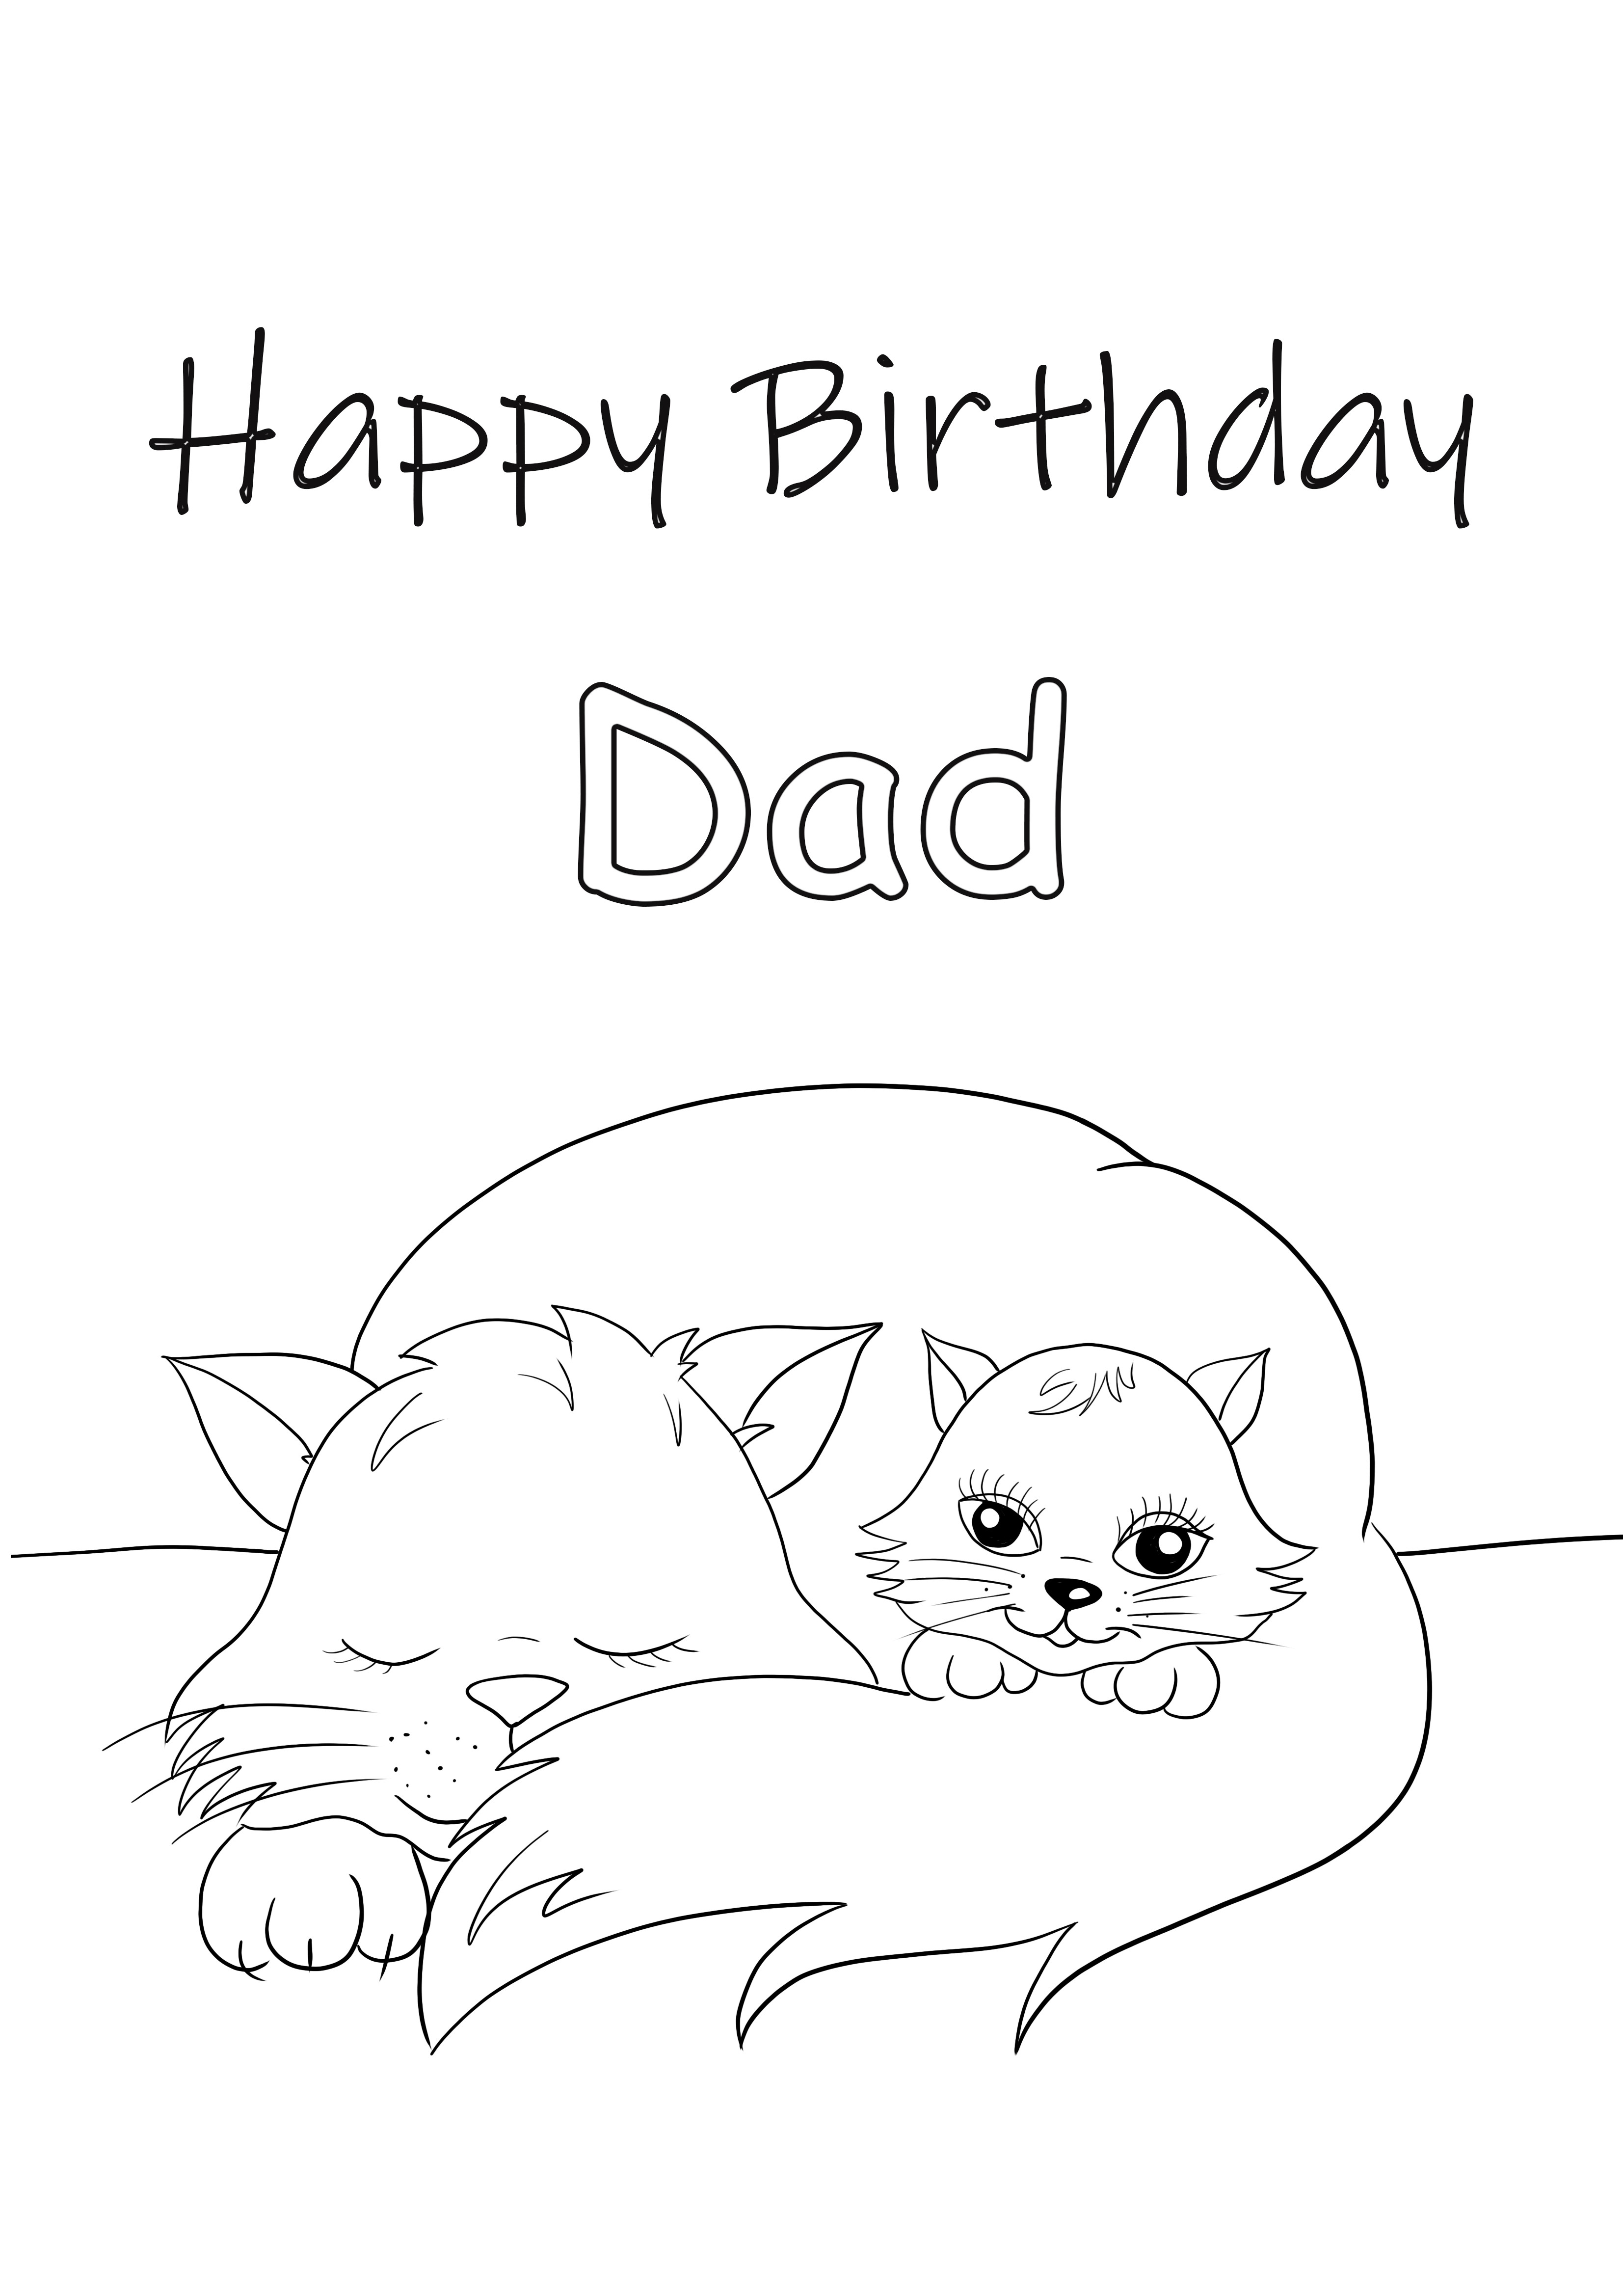 H B-day Dad card to download and color for free